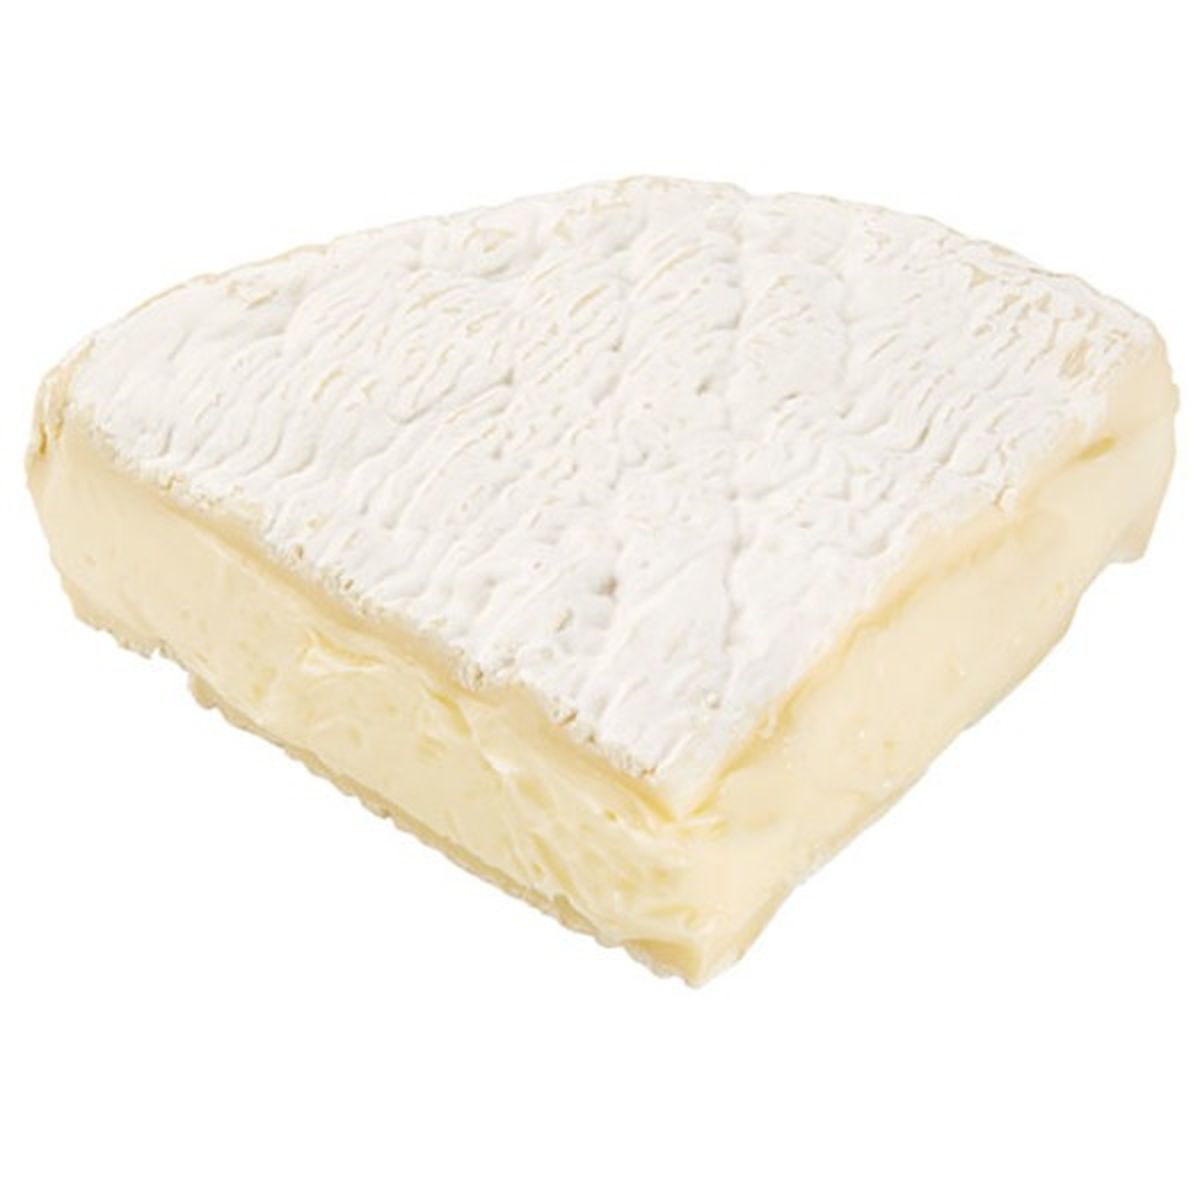 Calories in Jasper Hill Moses Sleeper Brie Cheese